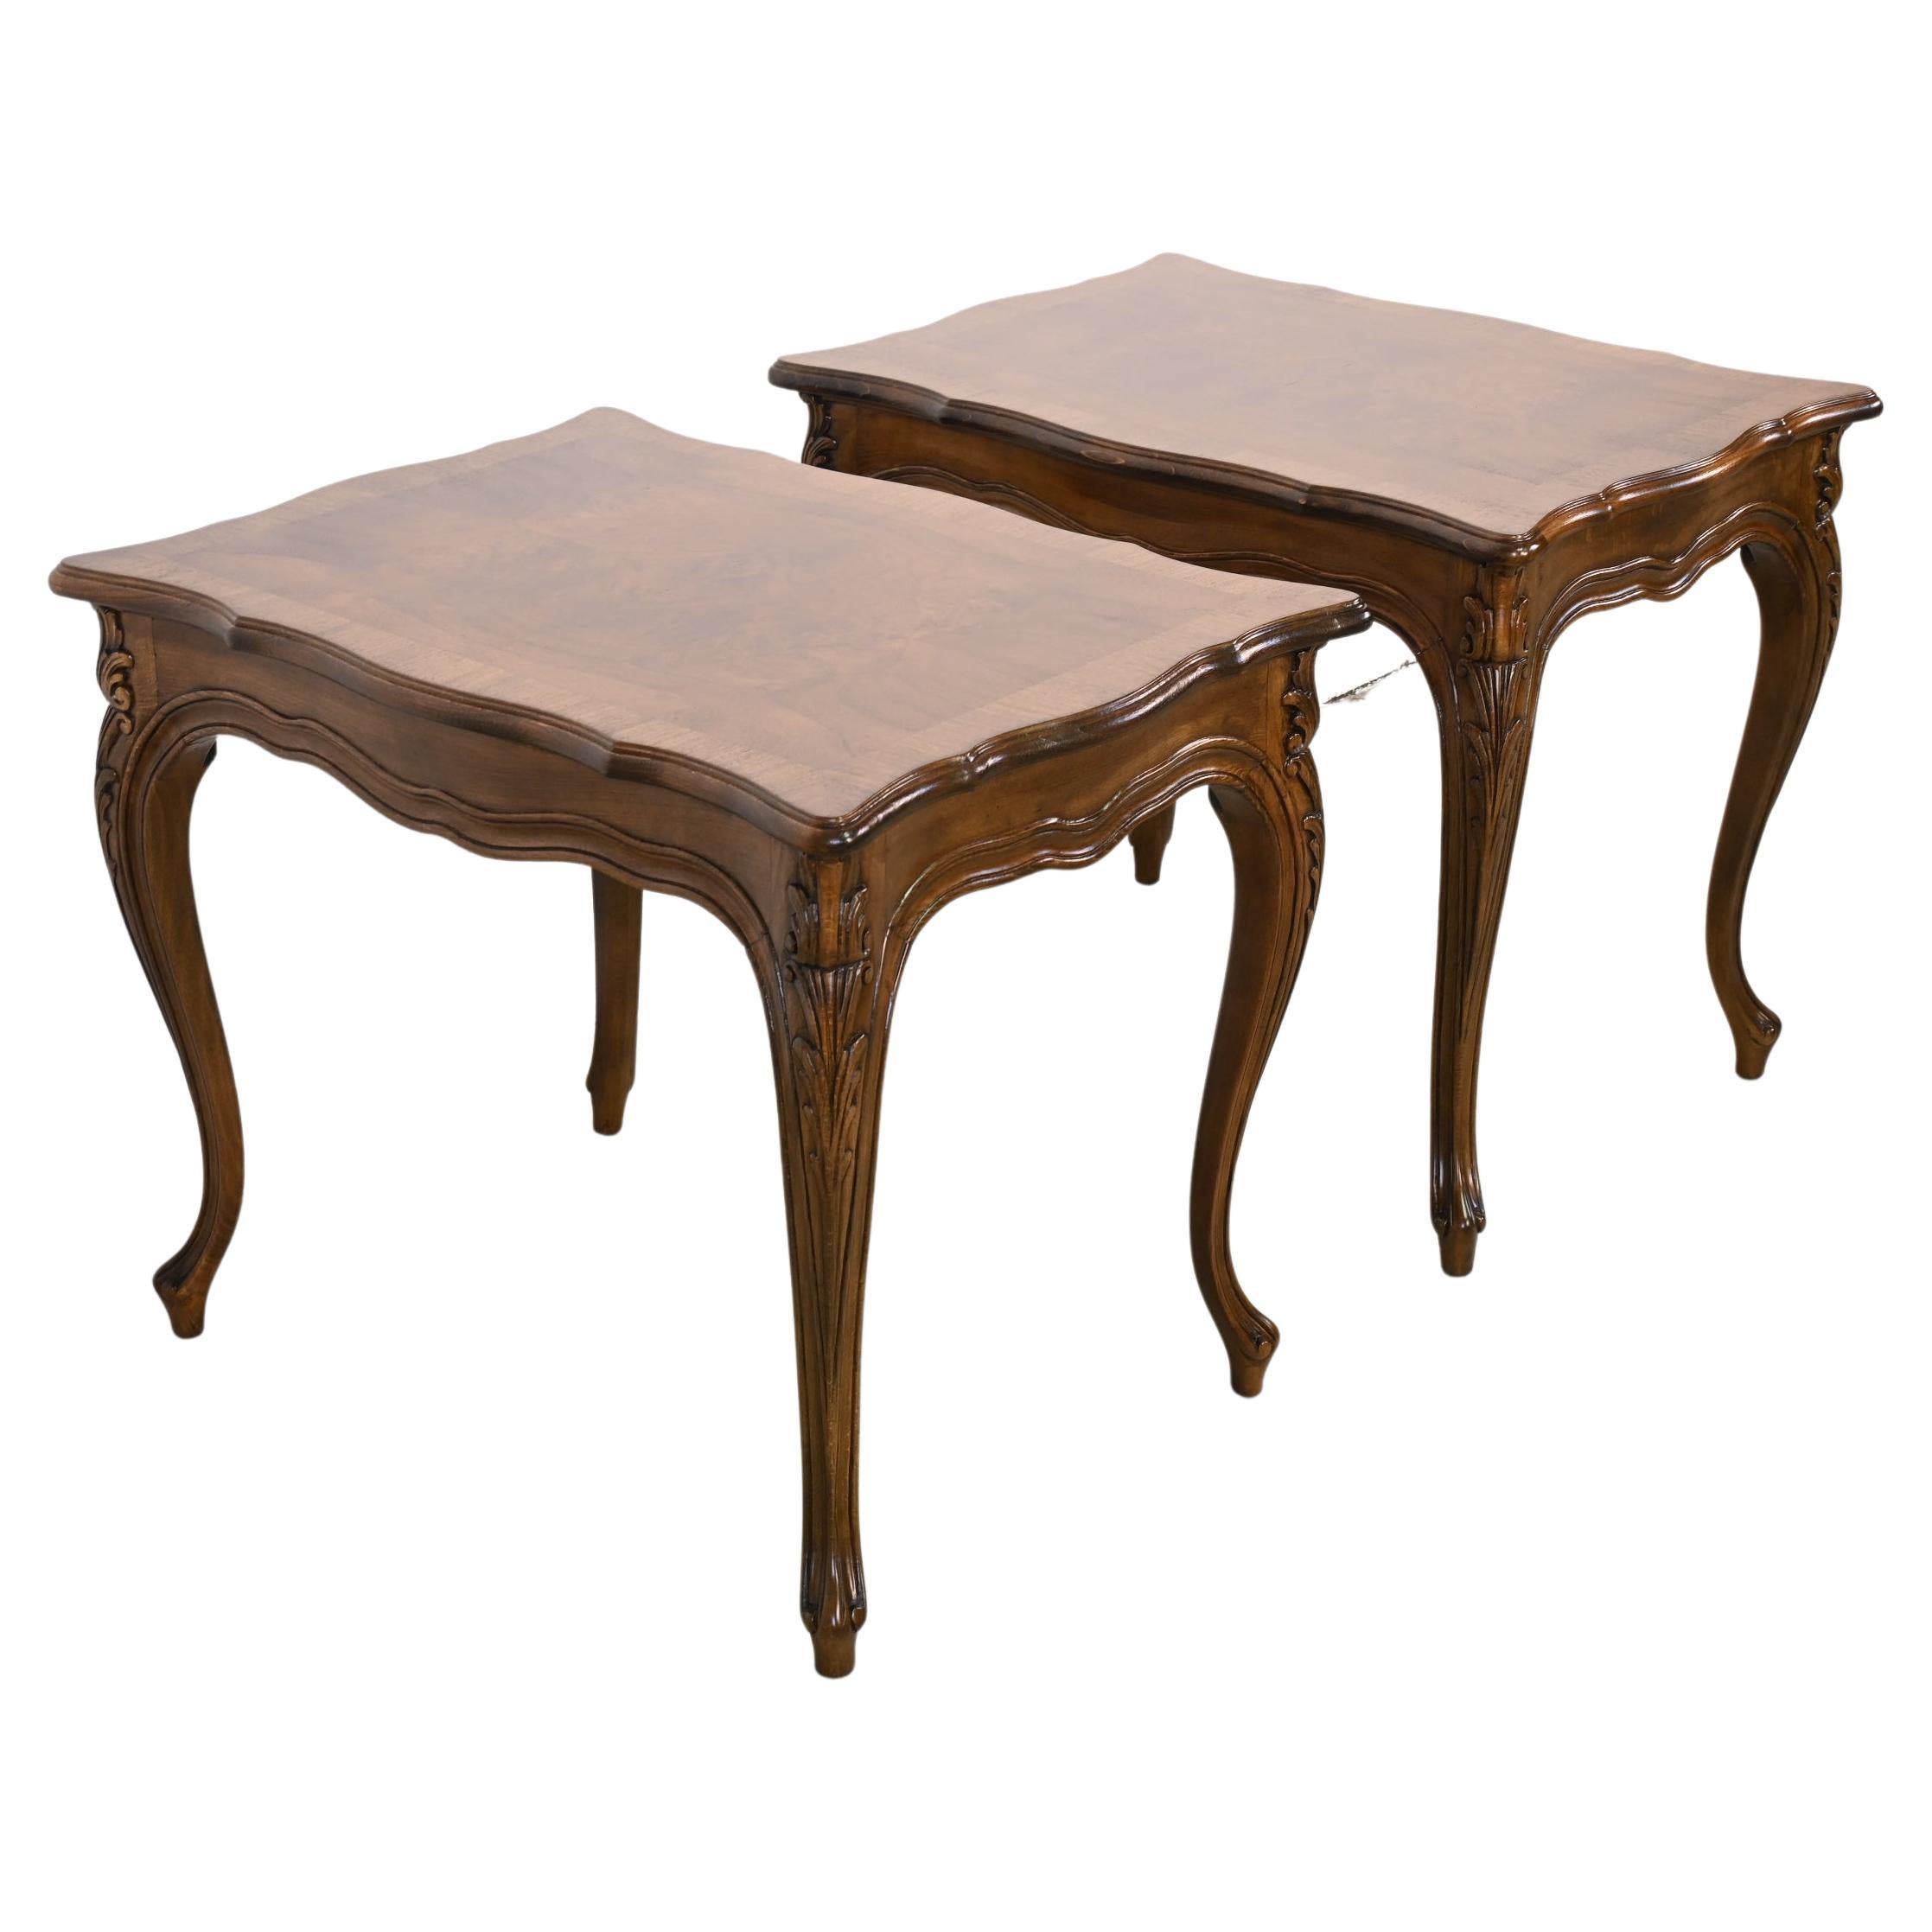 Karges Furniture French Provincial Burled Walnut End Tables - a Pair For Sale